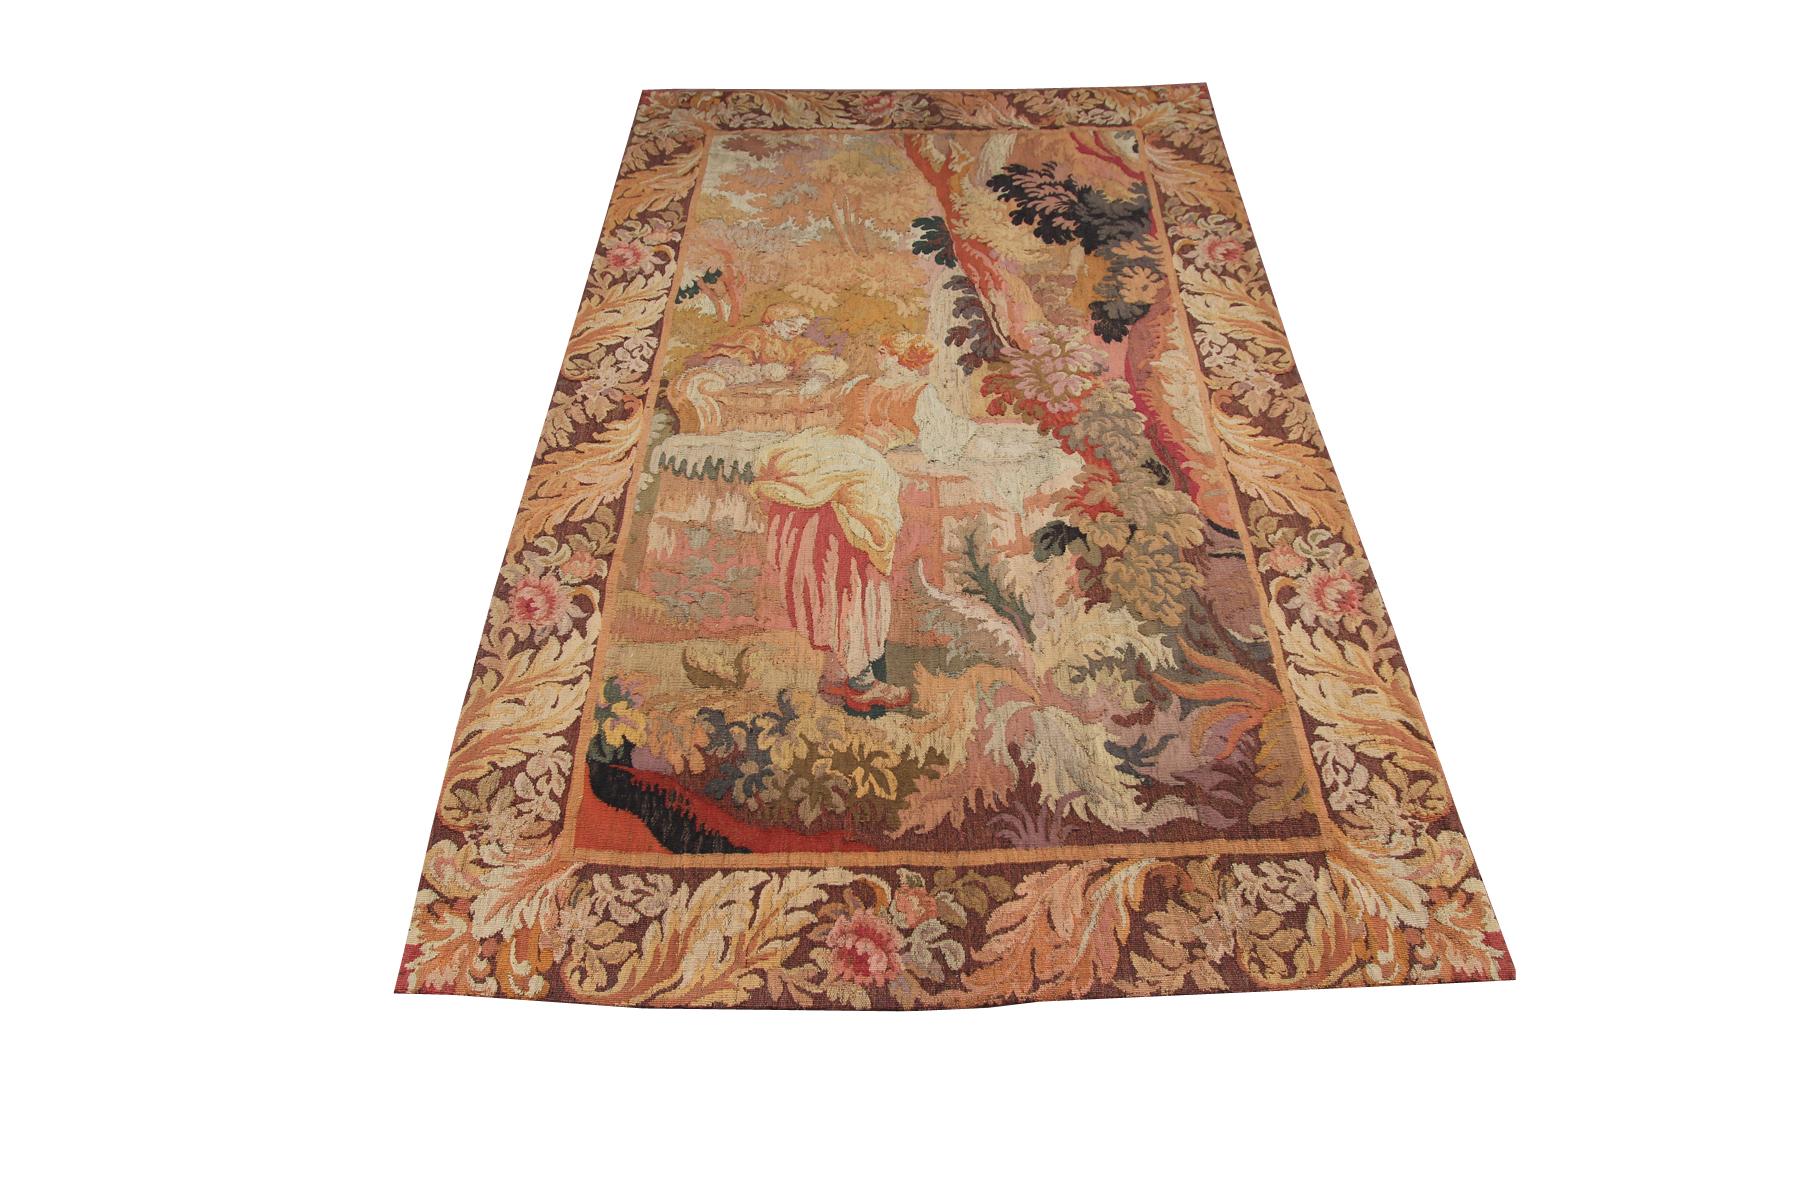 Hand-Woven Antique French Tapestry Handwoven French Tapestry Aubusson Verdure Tapestry For Sale